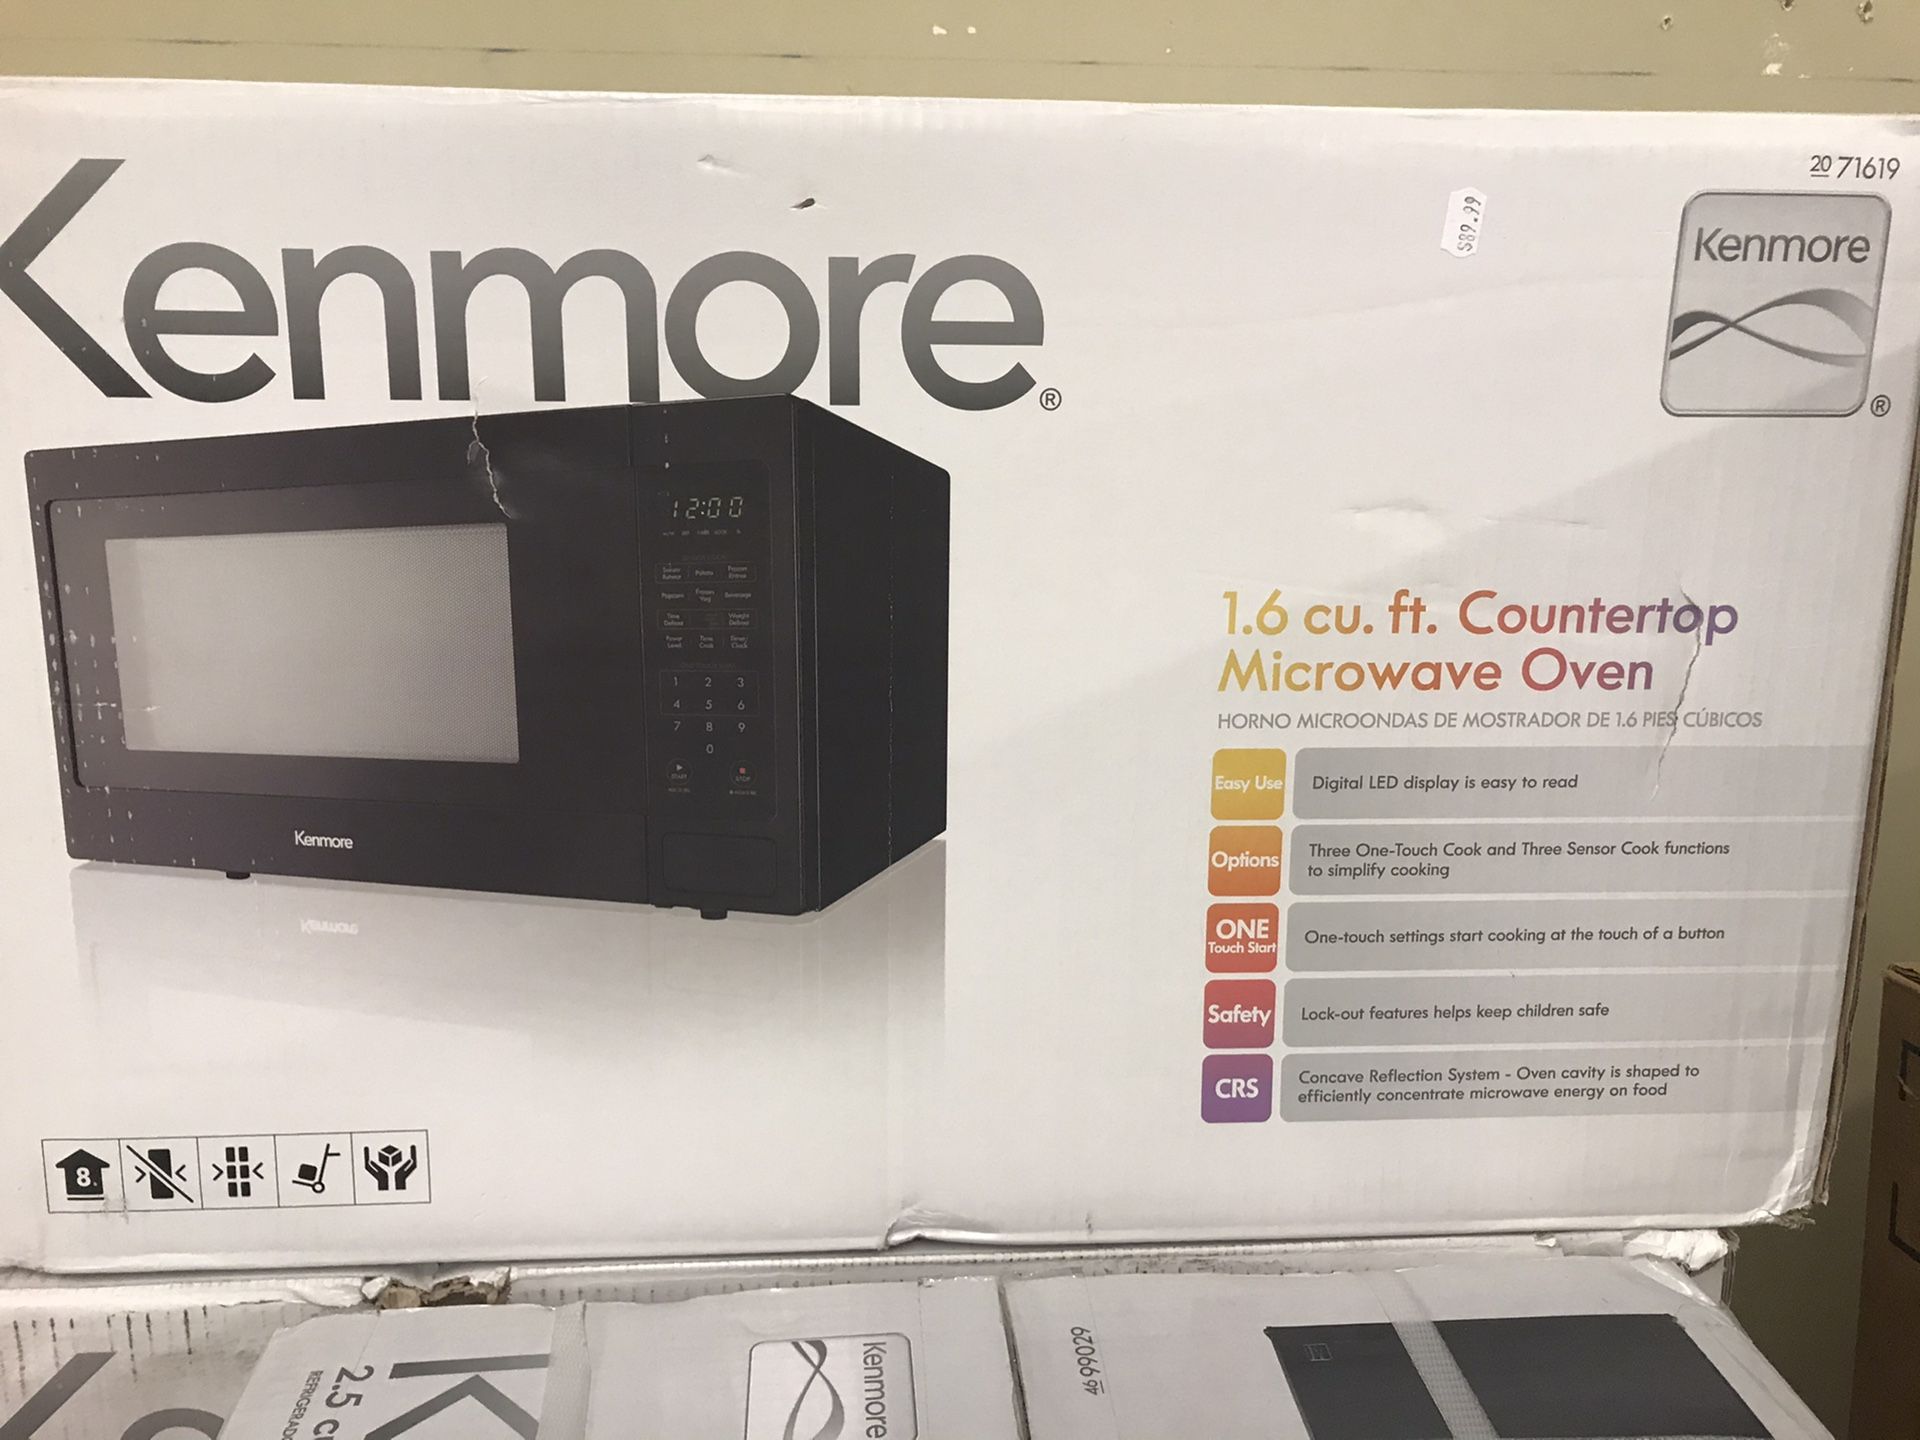 Kenmore 1.6 ft.³ countertop microwave oven digital display one touch start with blackout futures helps keep children safe black